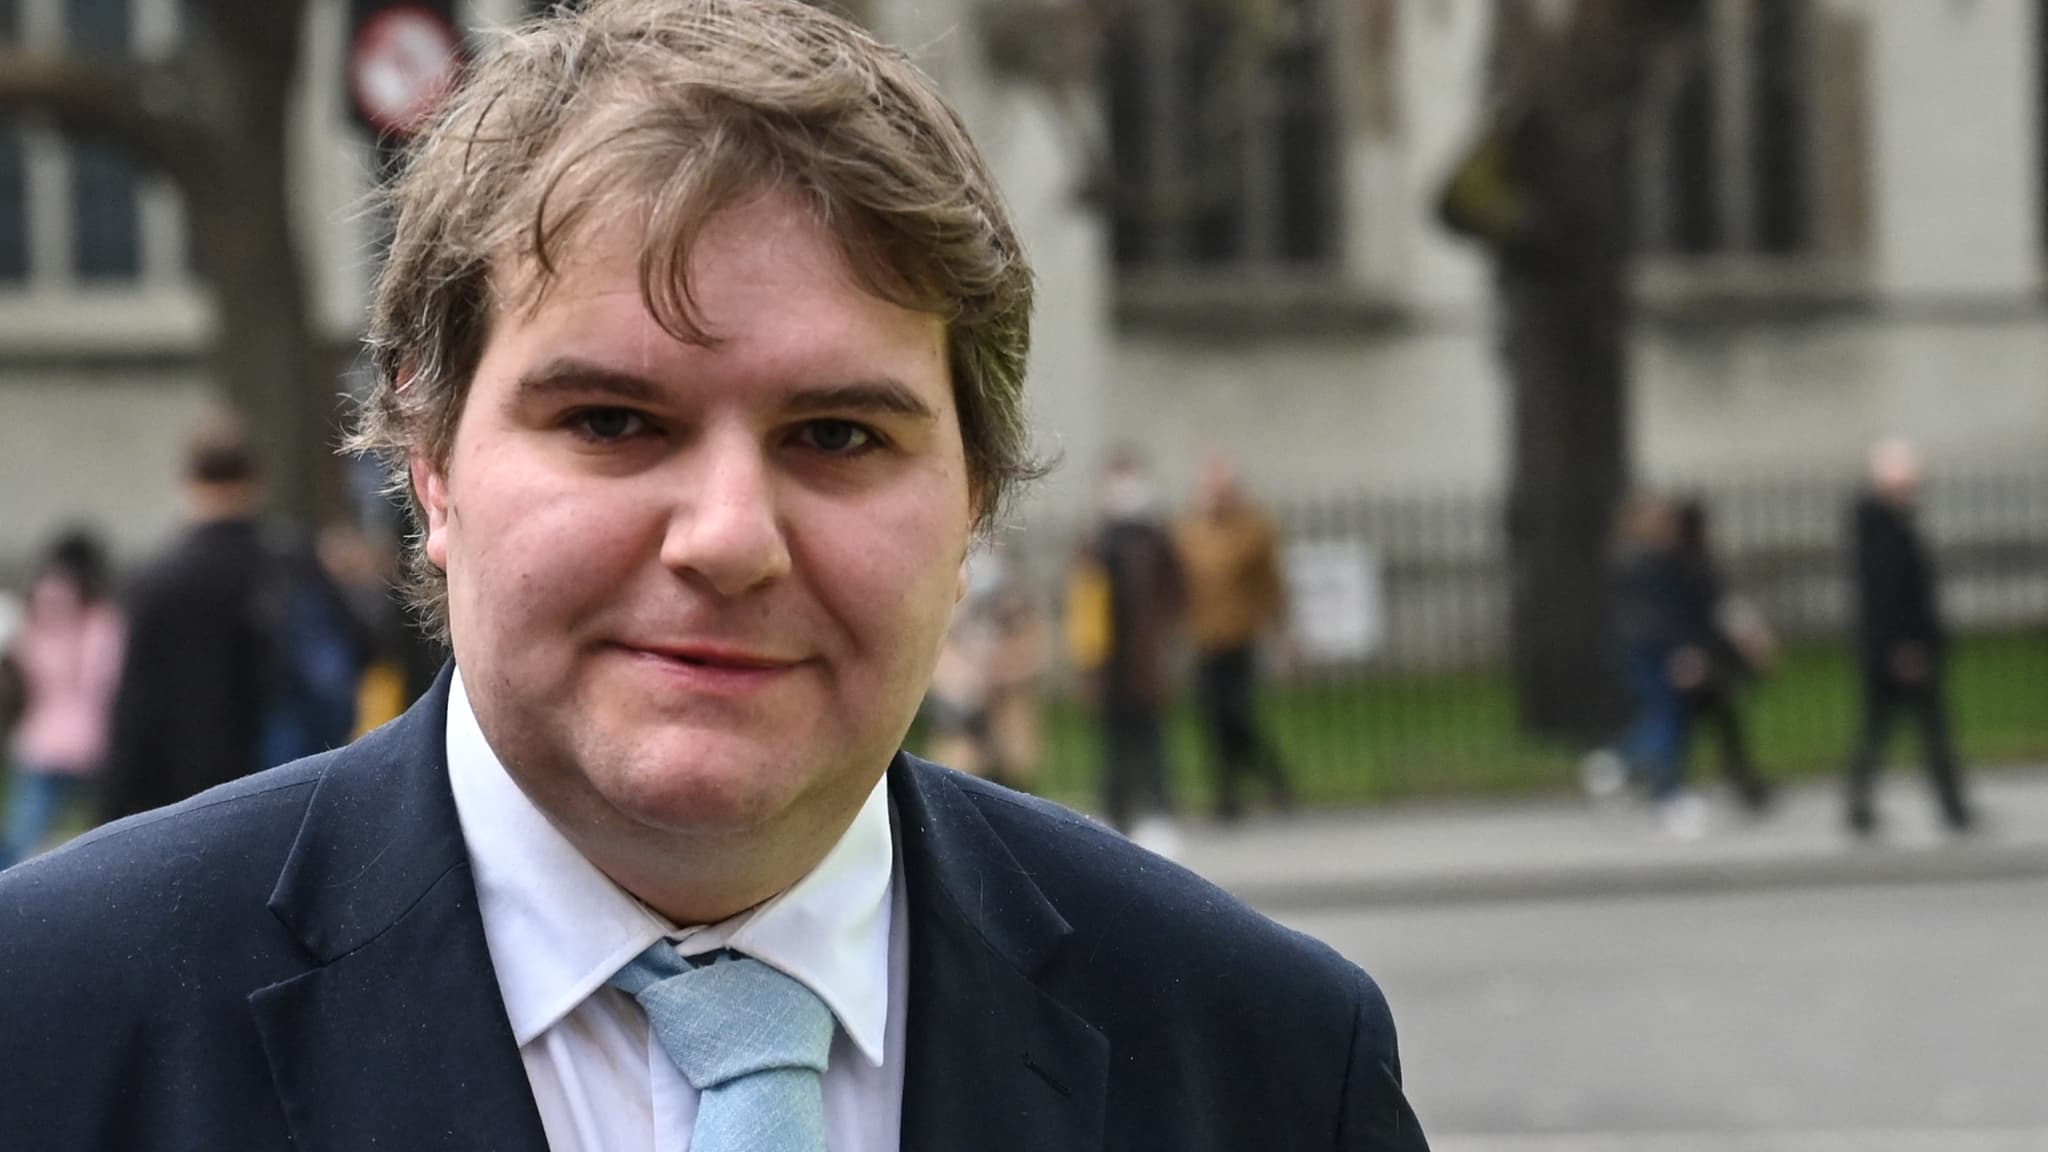 An MP reveals being trans for the first time